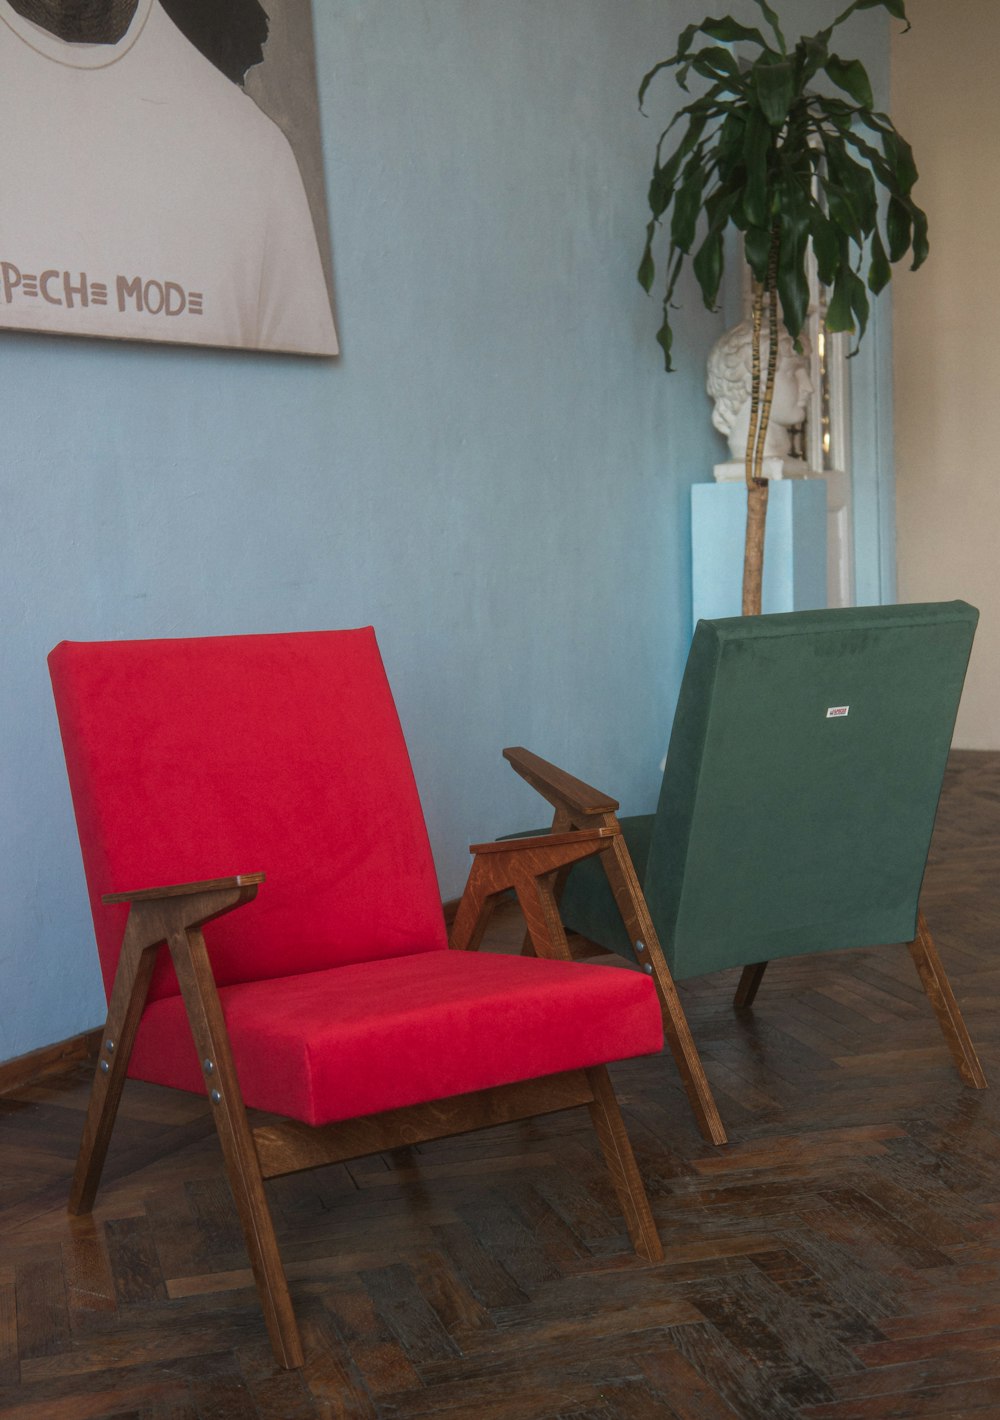 a red chair sitting next to a green chair